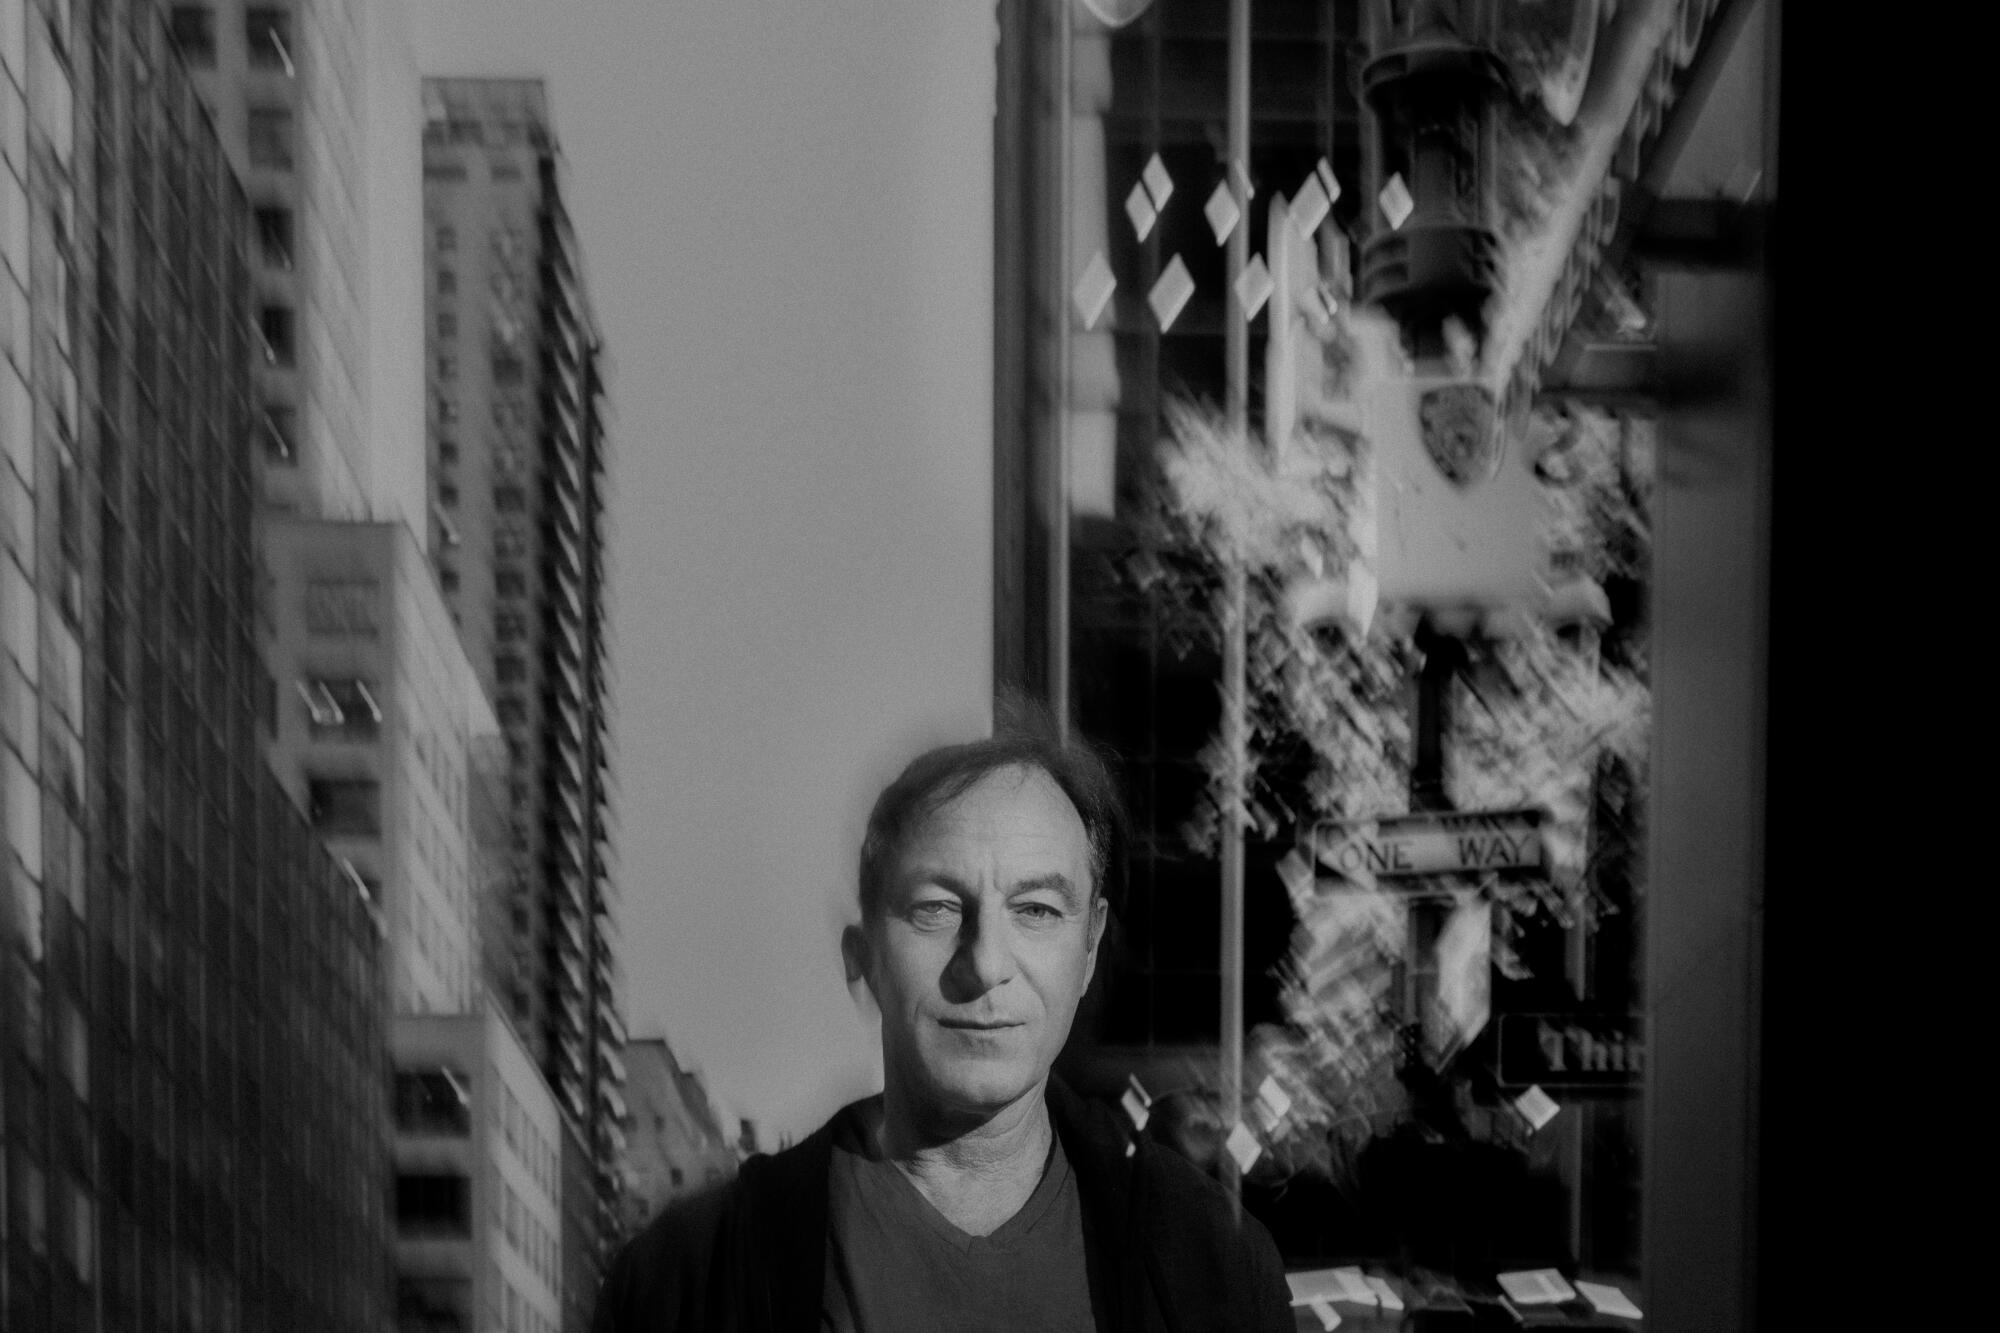 A black-and-white photo of a man on a street in New York City, tall buildings behind him.